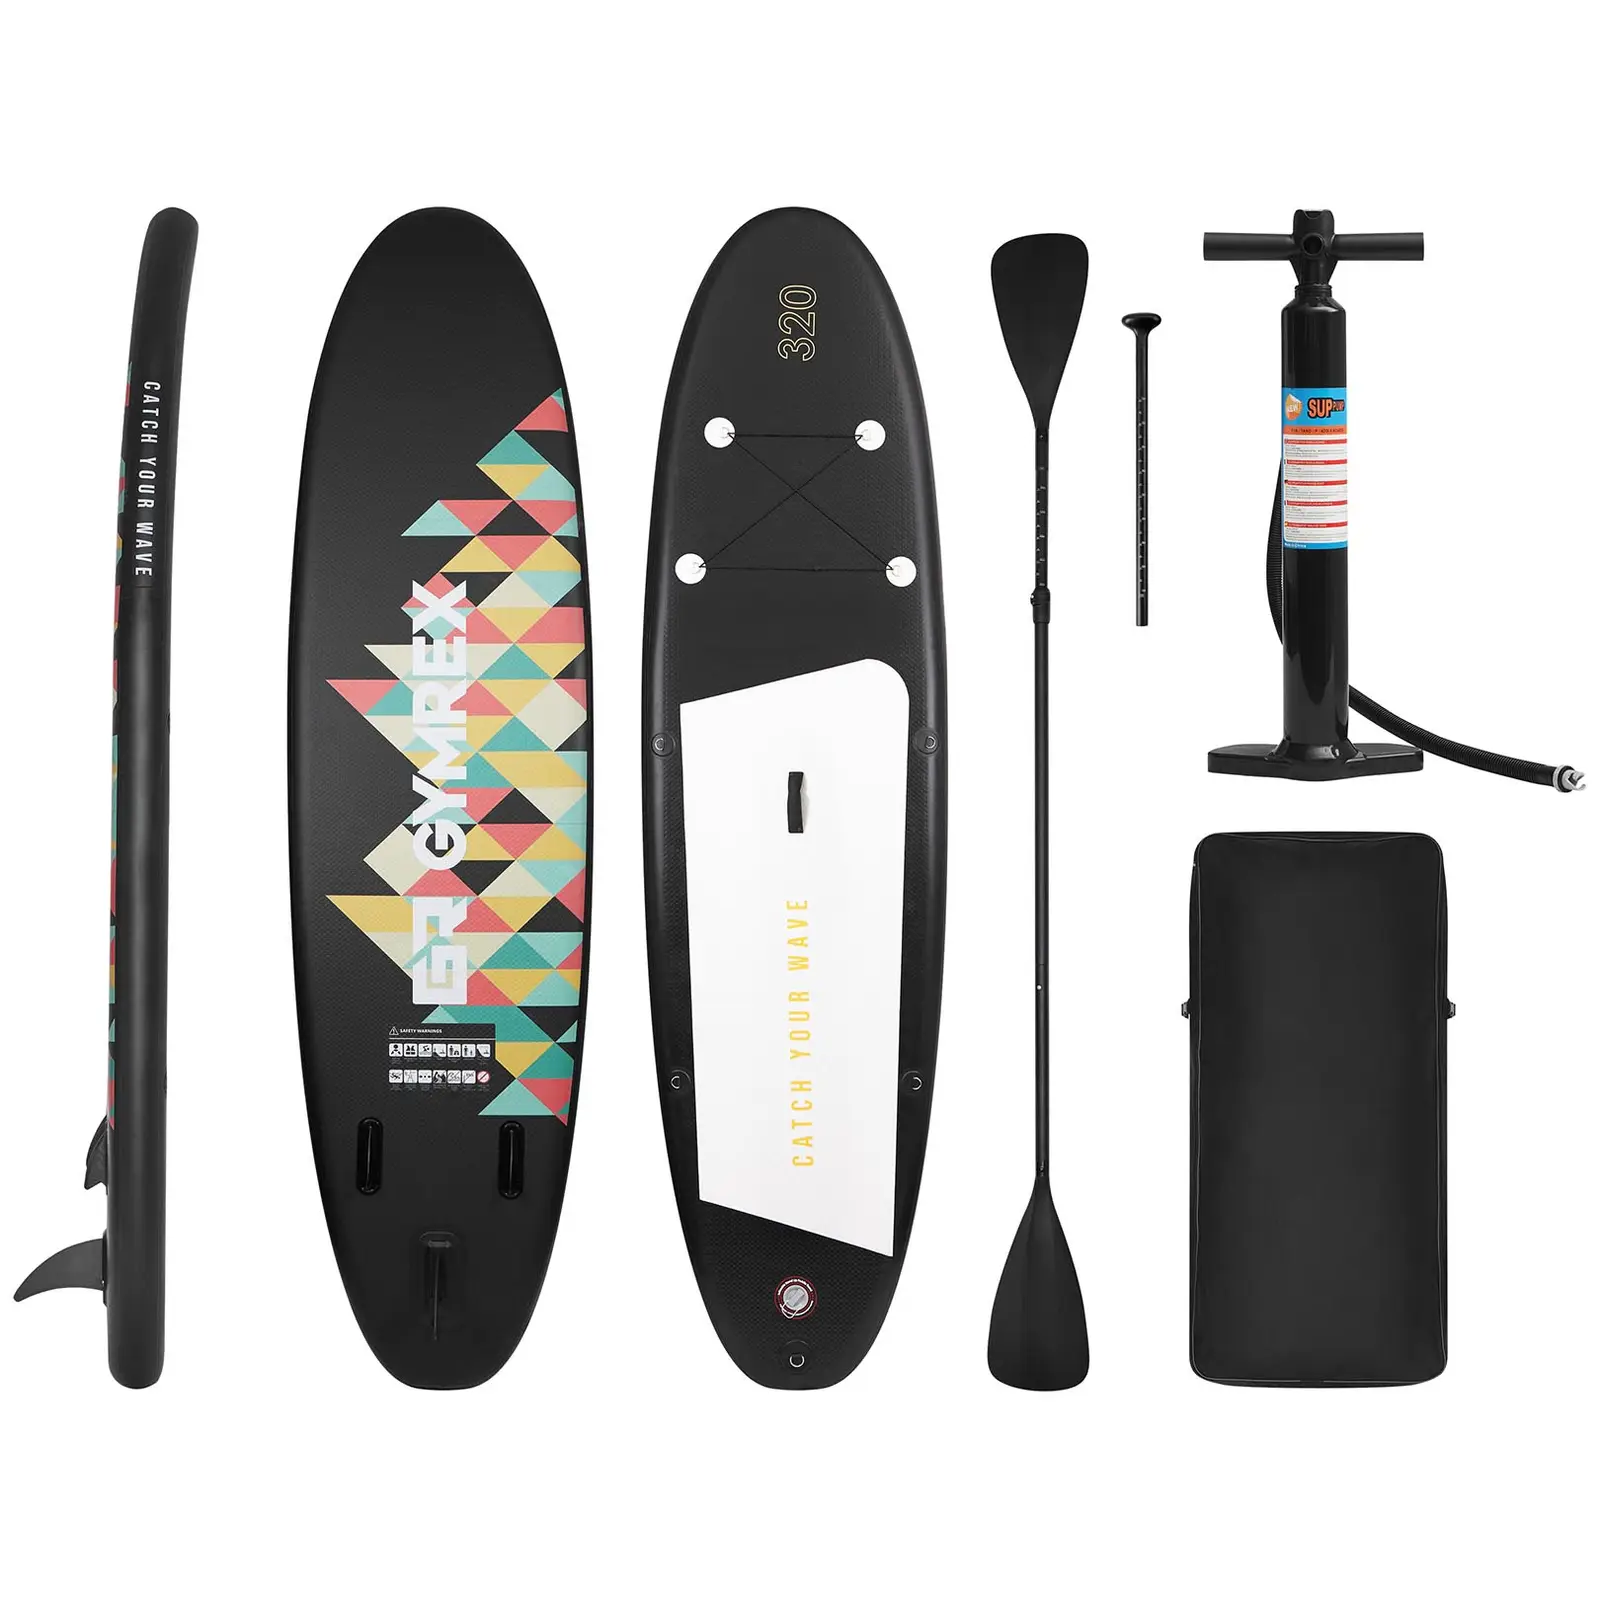 Stand up paddle gonflable - 110 kg - Noir